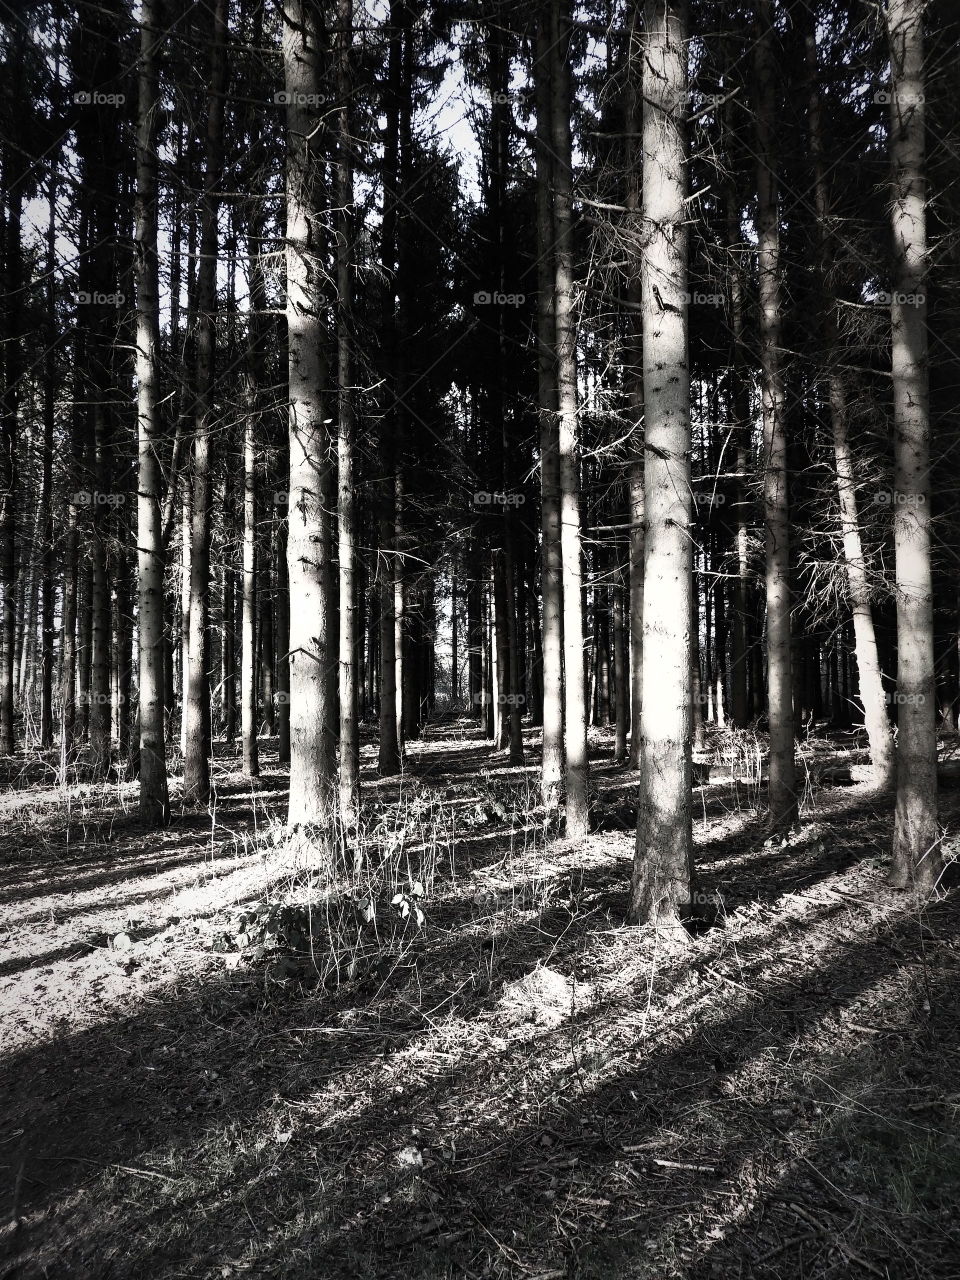 Gloomy forest in black and White